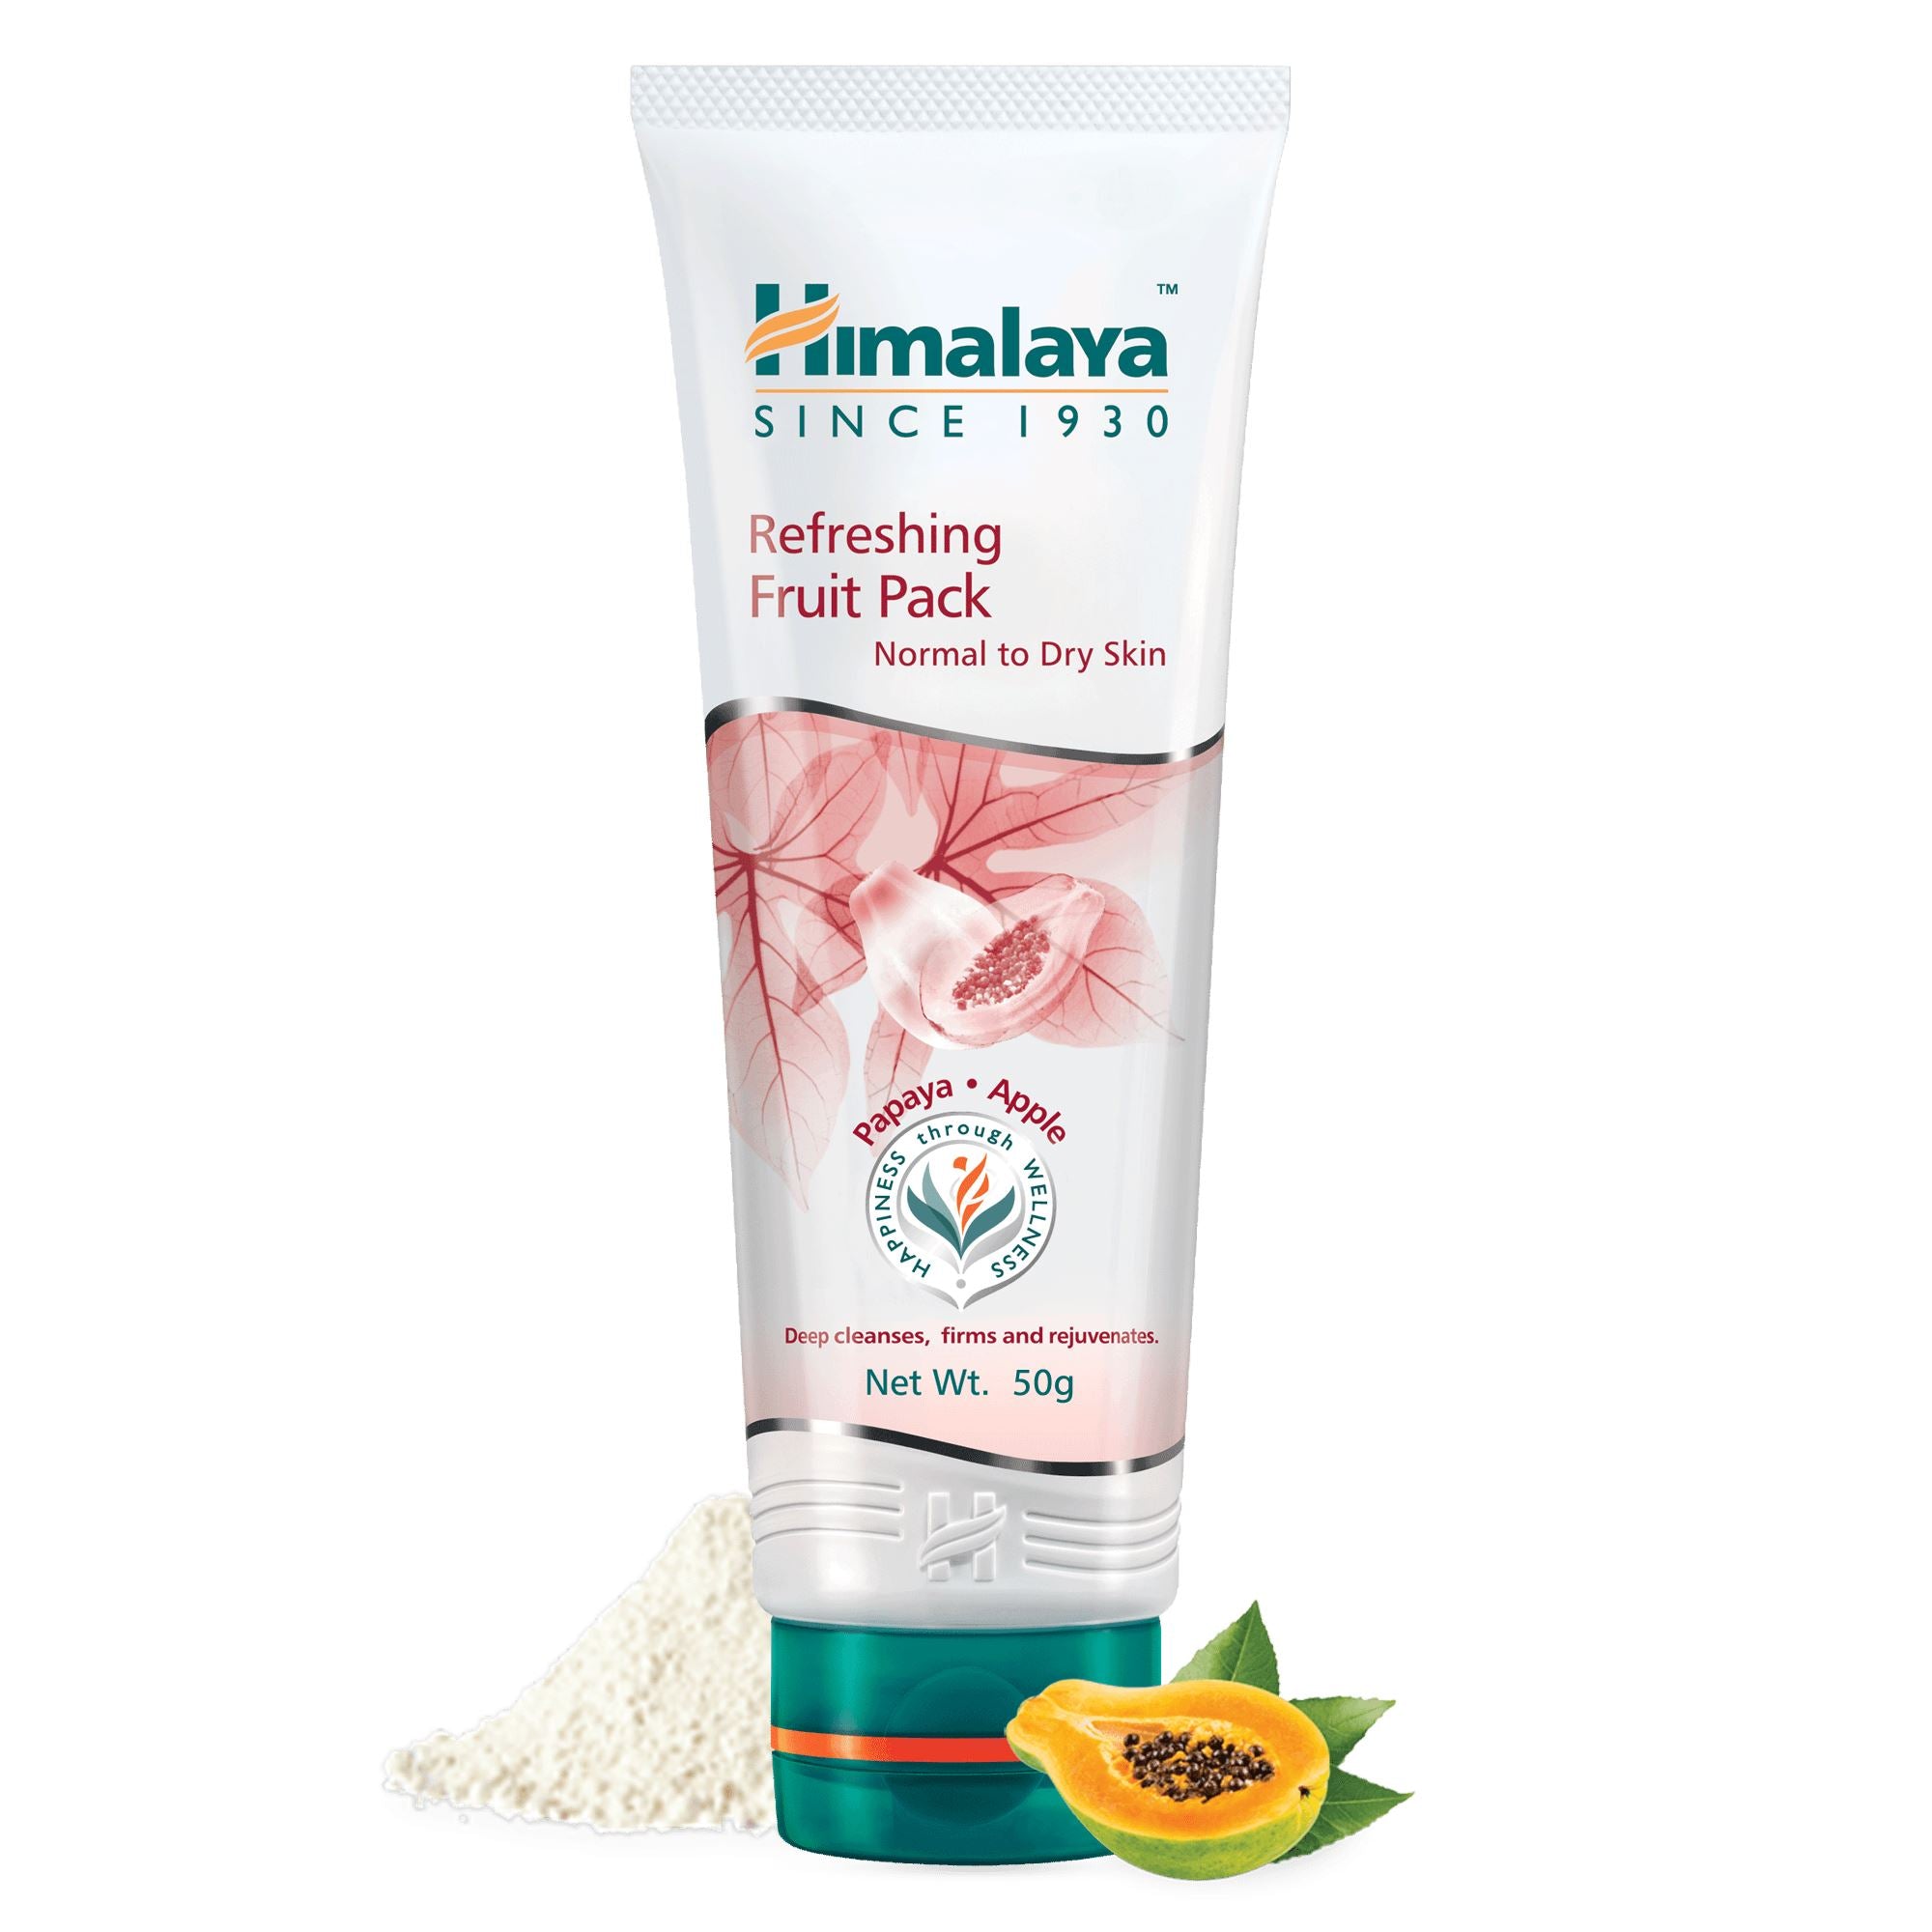 Himalaya Refreshing Fruit Pack 50g - Deep cleanses, firms and rejuvenates